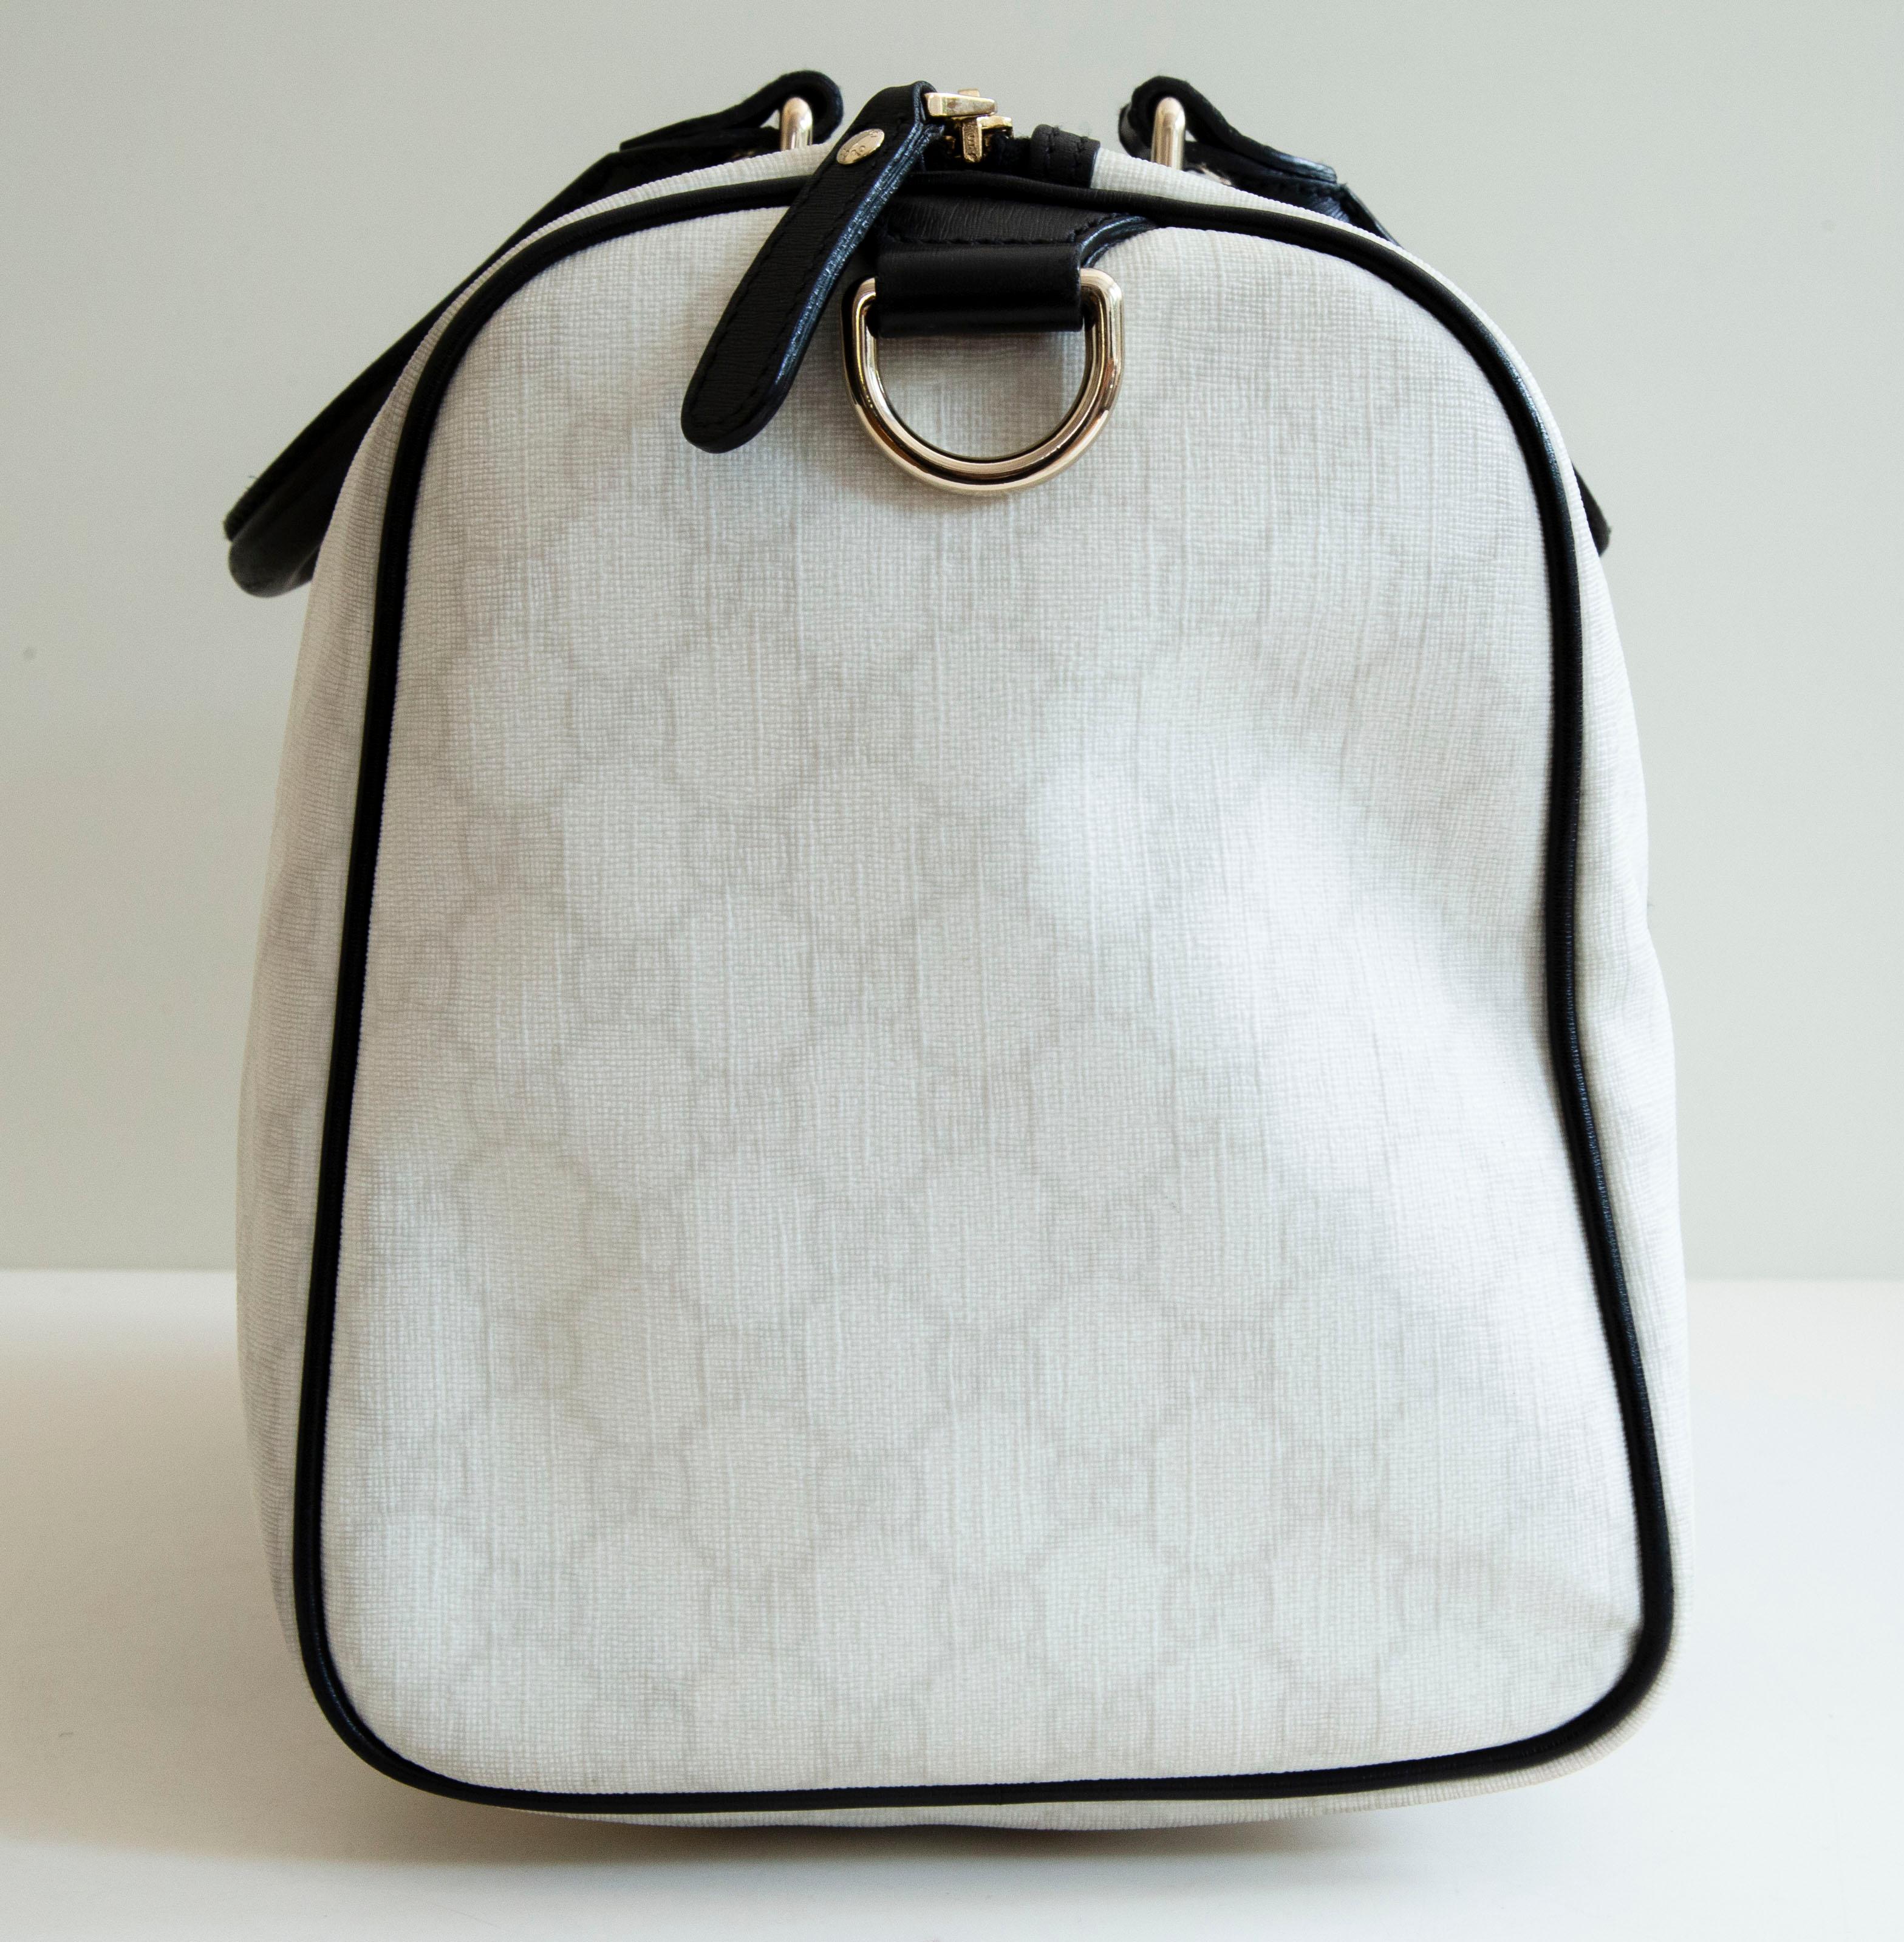 Gucci Boston bag made of white-off GG coated canvas with black leather trim and light gold-toned hardware. The interior is lined with black fabric and next to the major compartment, it features a side pocket. The exterior is in very good condition